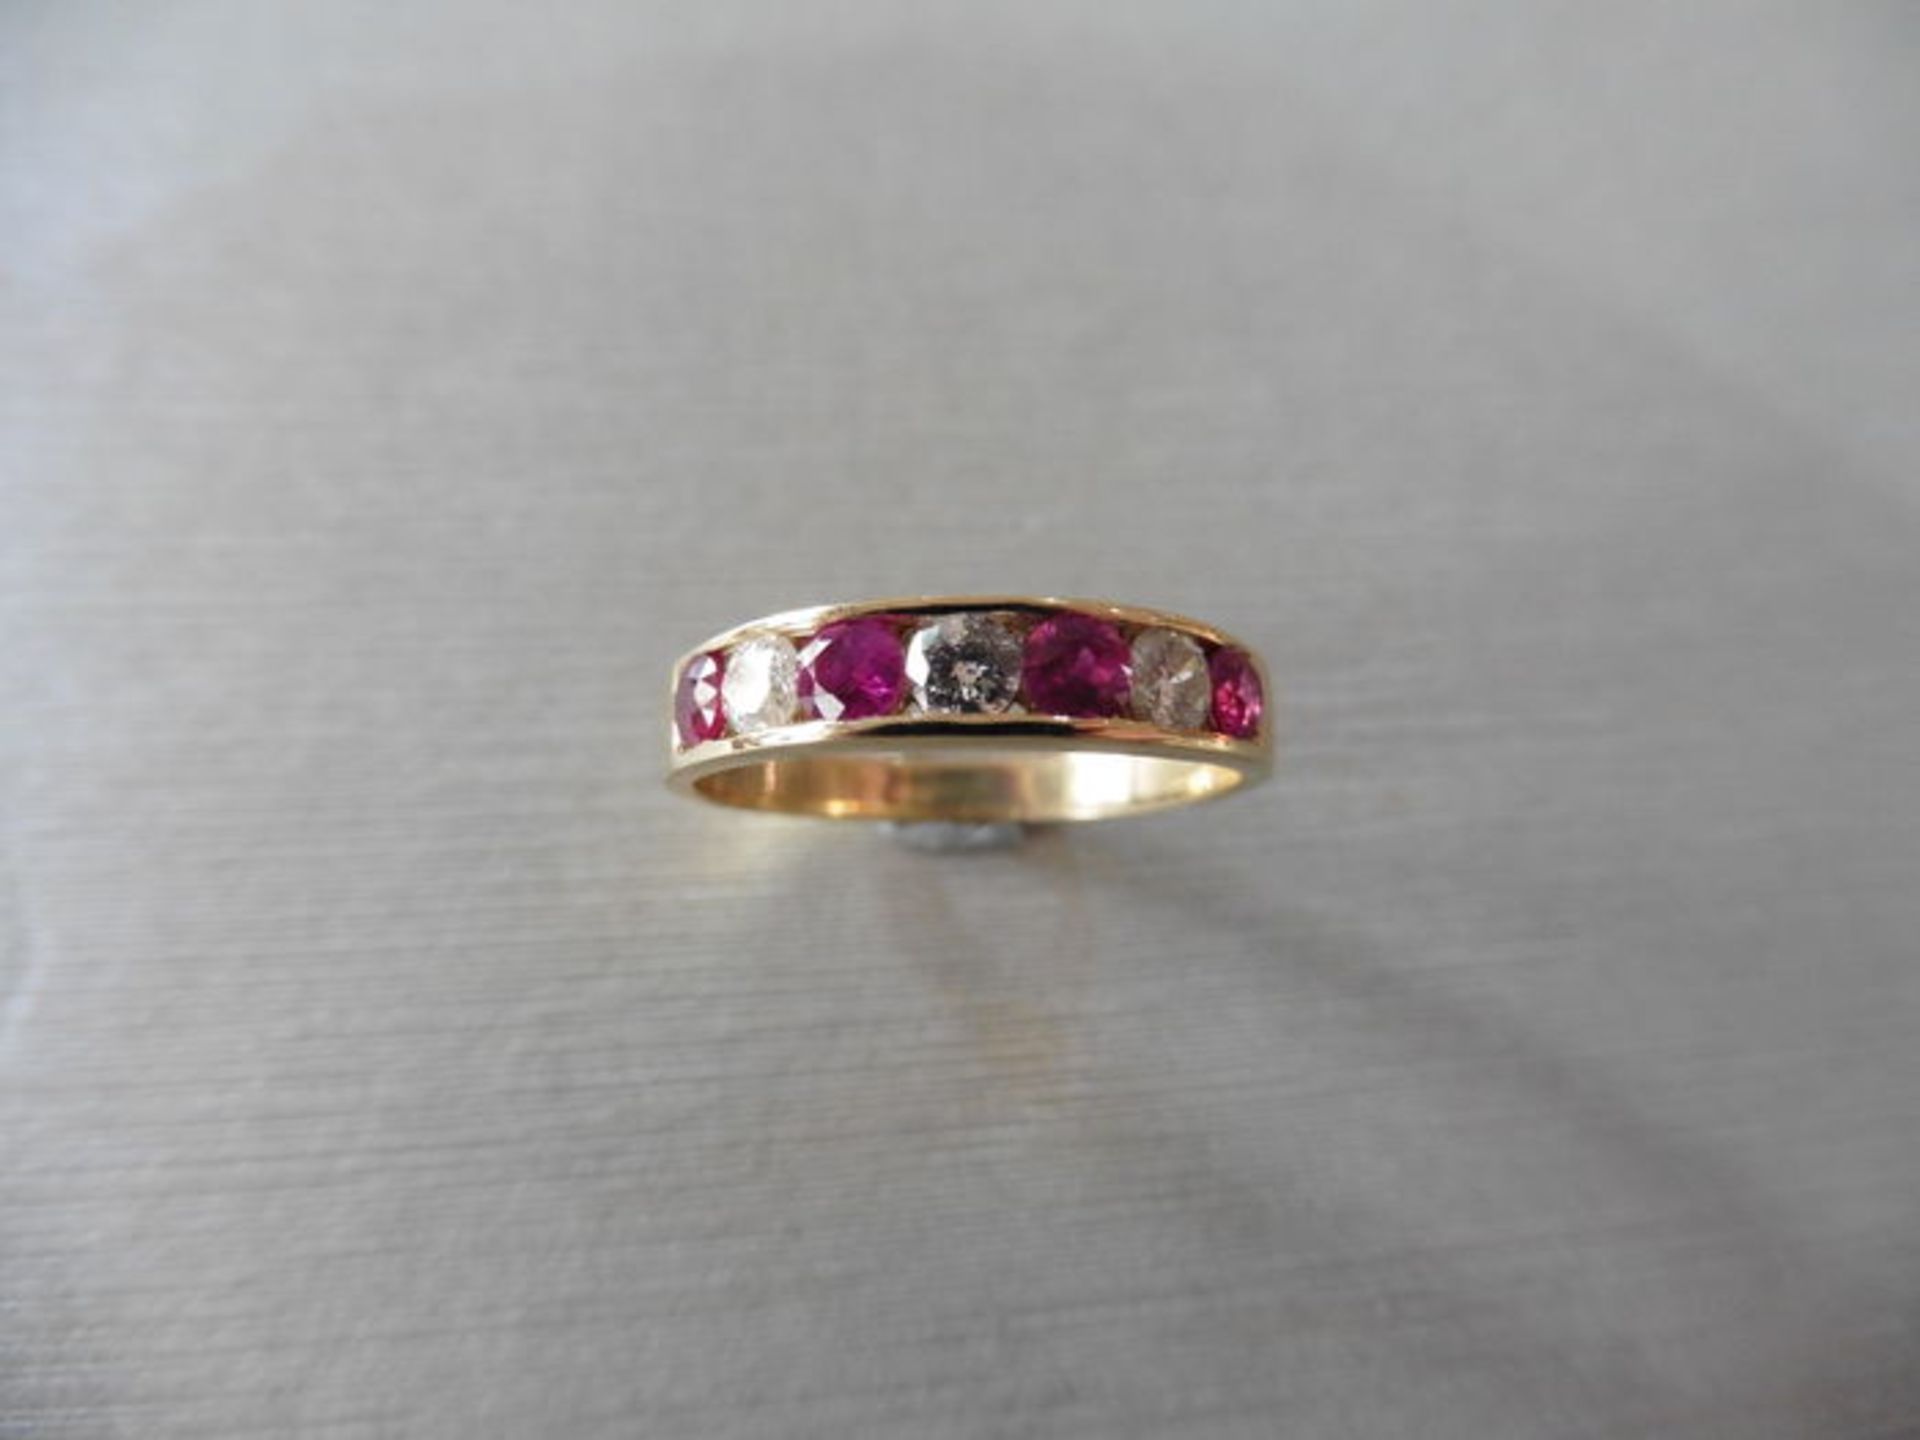 Ruby and diamond eternity band ring set in 9ct yellow gold. 4 small round cut rubies ( treated ) 0. - Image 2 of 3